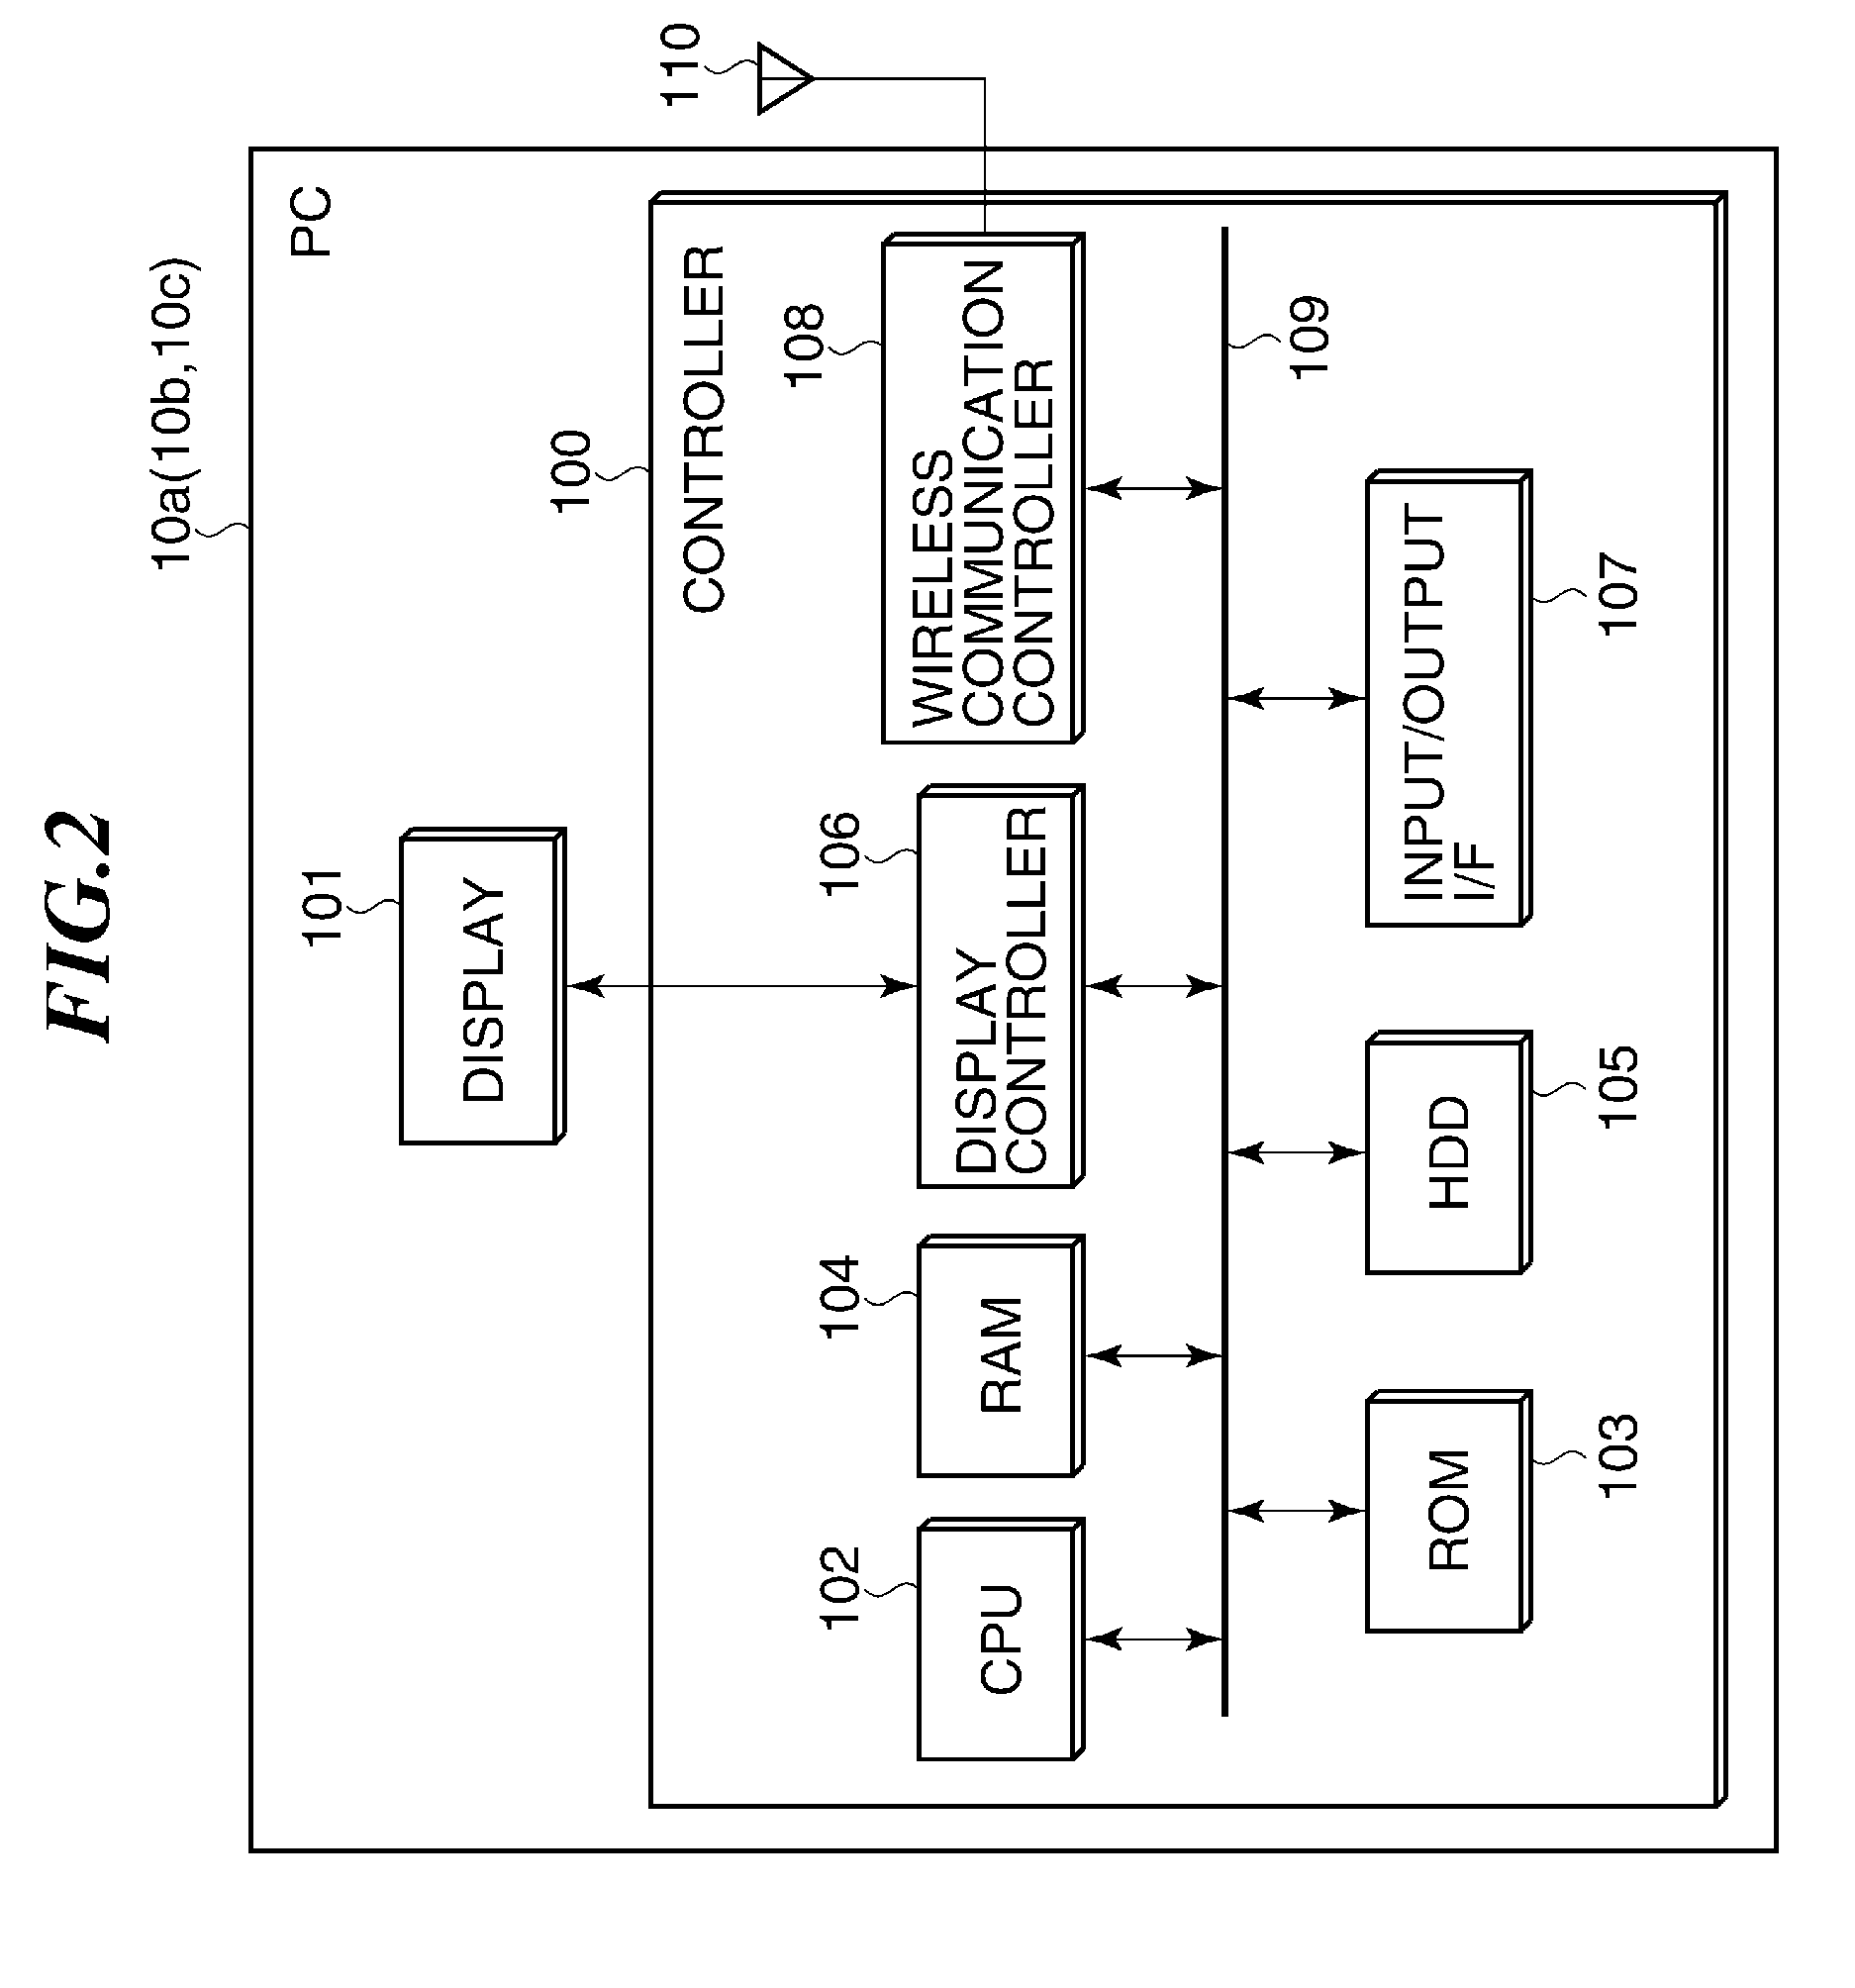 Method, system, apparatus and medium for minimizing unnecessary processing associated with connection/disconnection of a same host